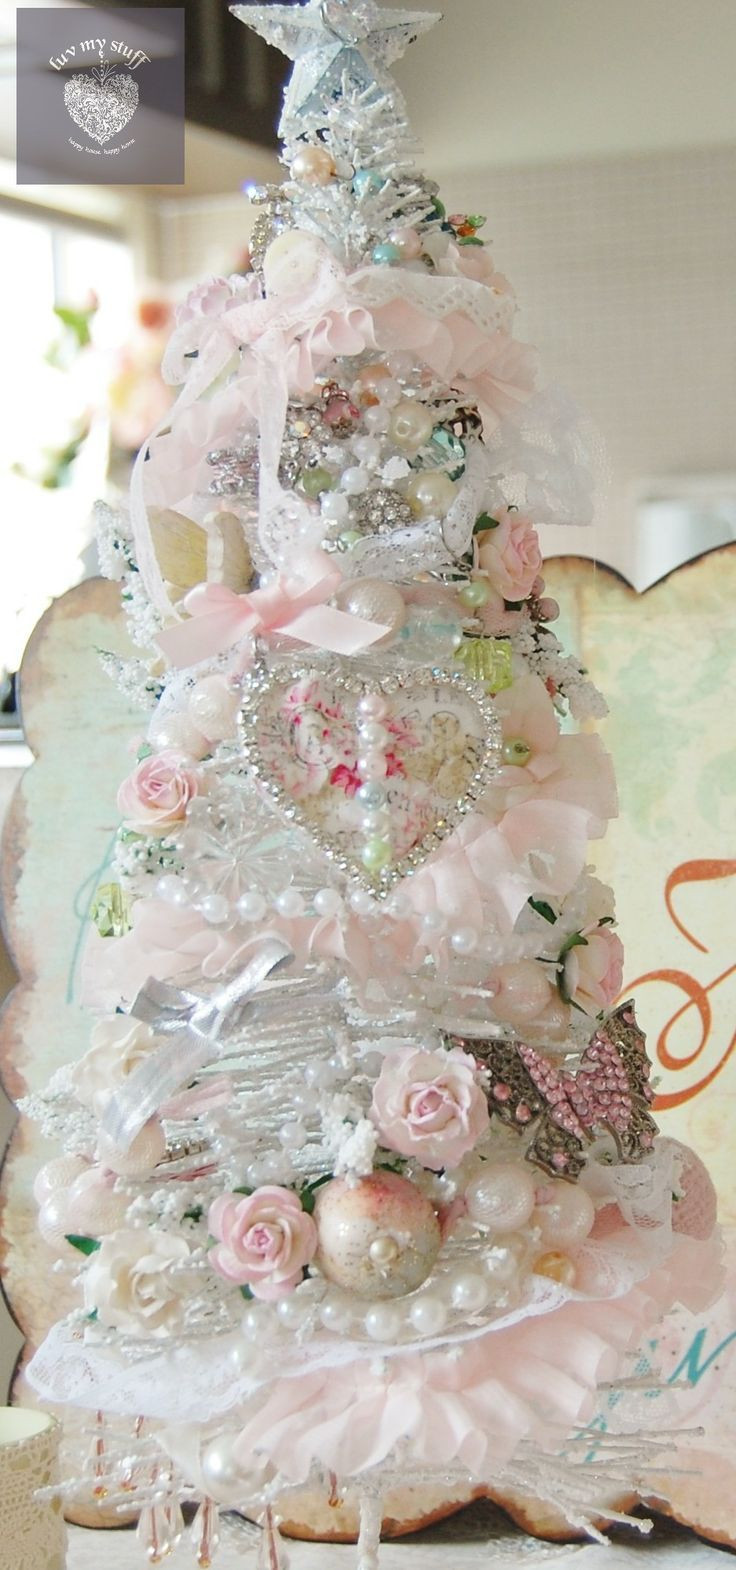 Shabby Chic Christmas Trees
 17 Best images about Shabby Christmas on Pinterest